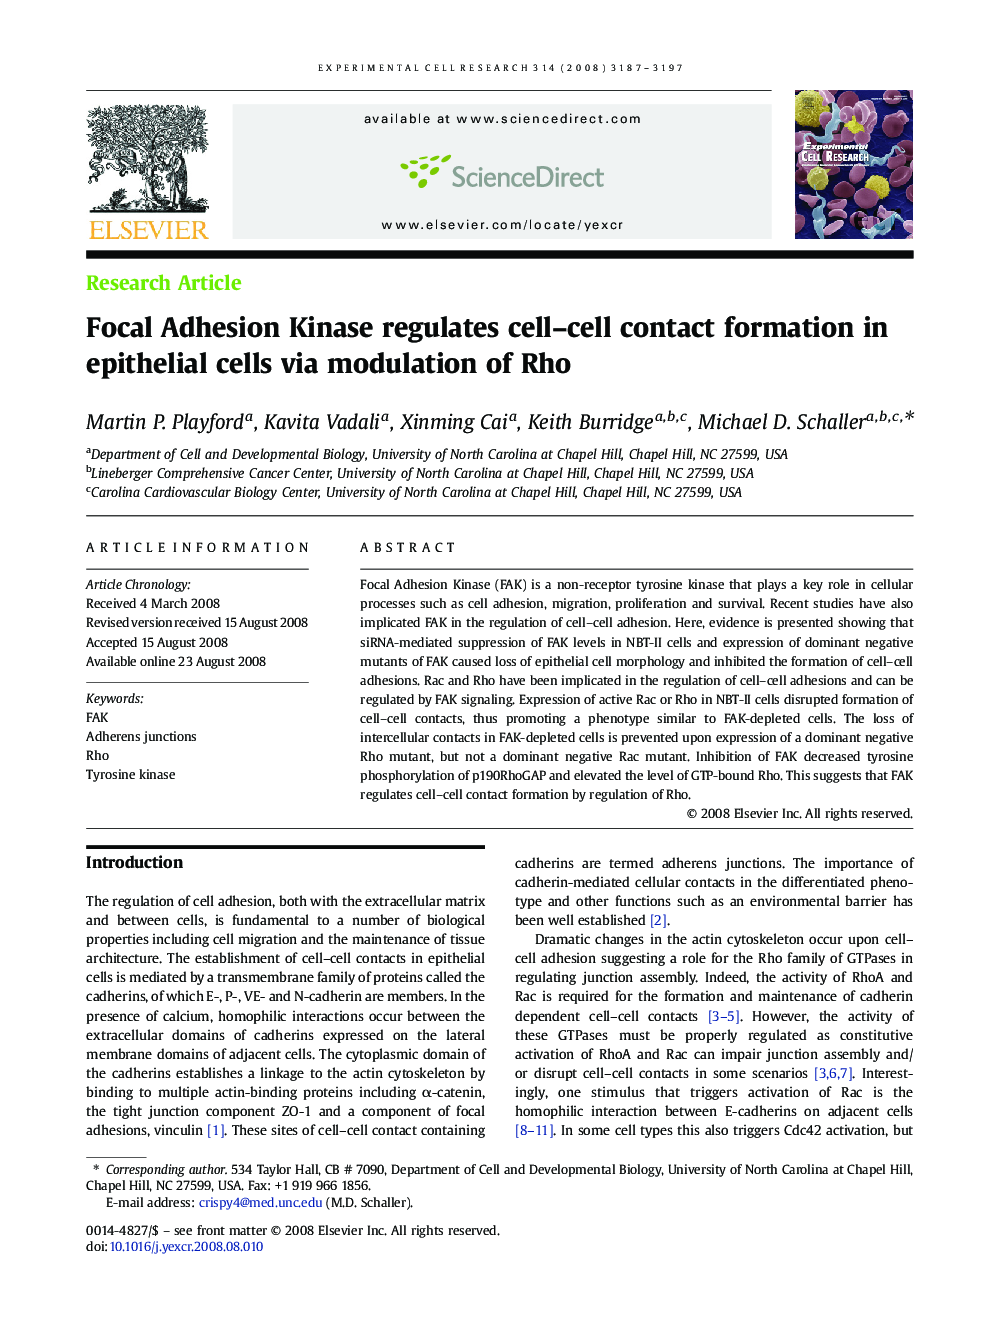 Focal Adhesion Kinase regulates cell–cell contact formation in epithelial cells via modulation of Rho